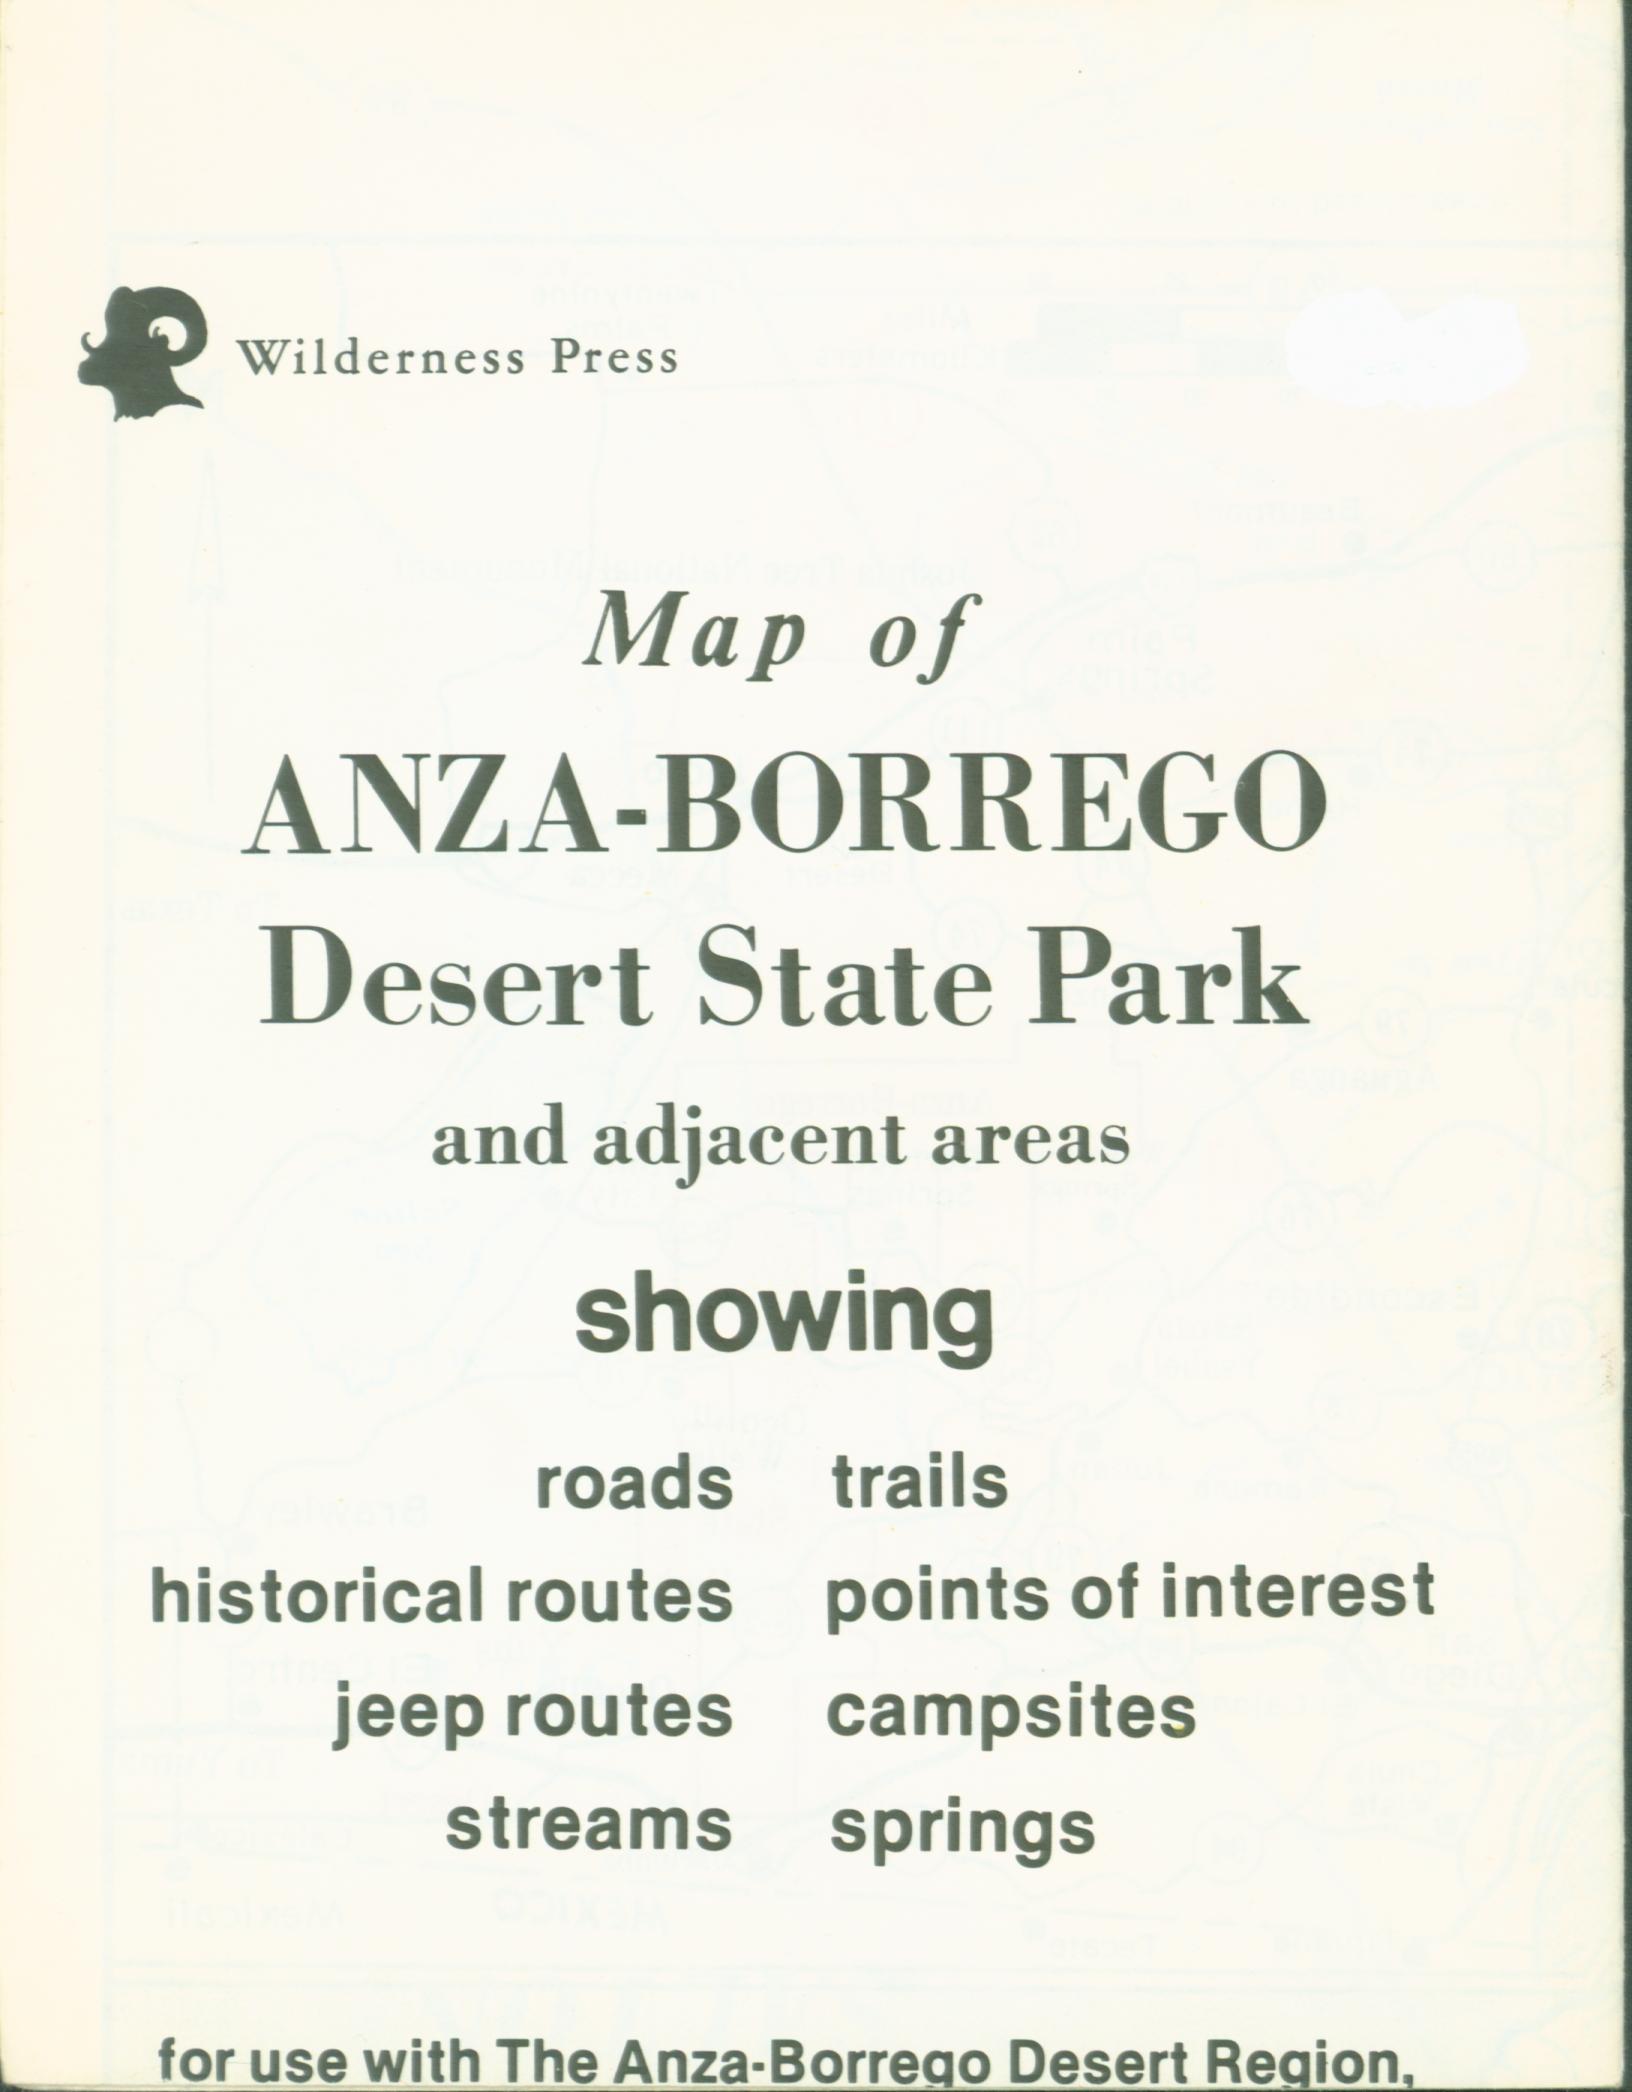 MAP OF ANZA-BORREGO DESERT STATE PARK and adjacent areas.